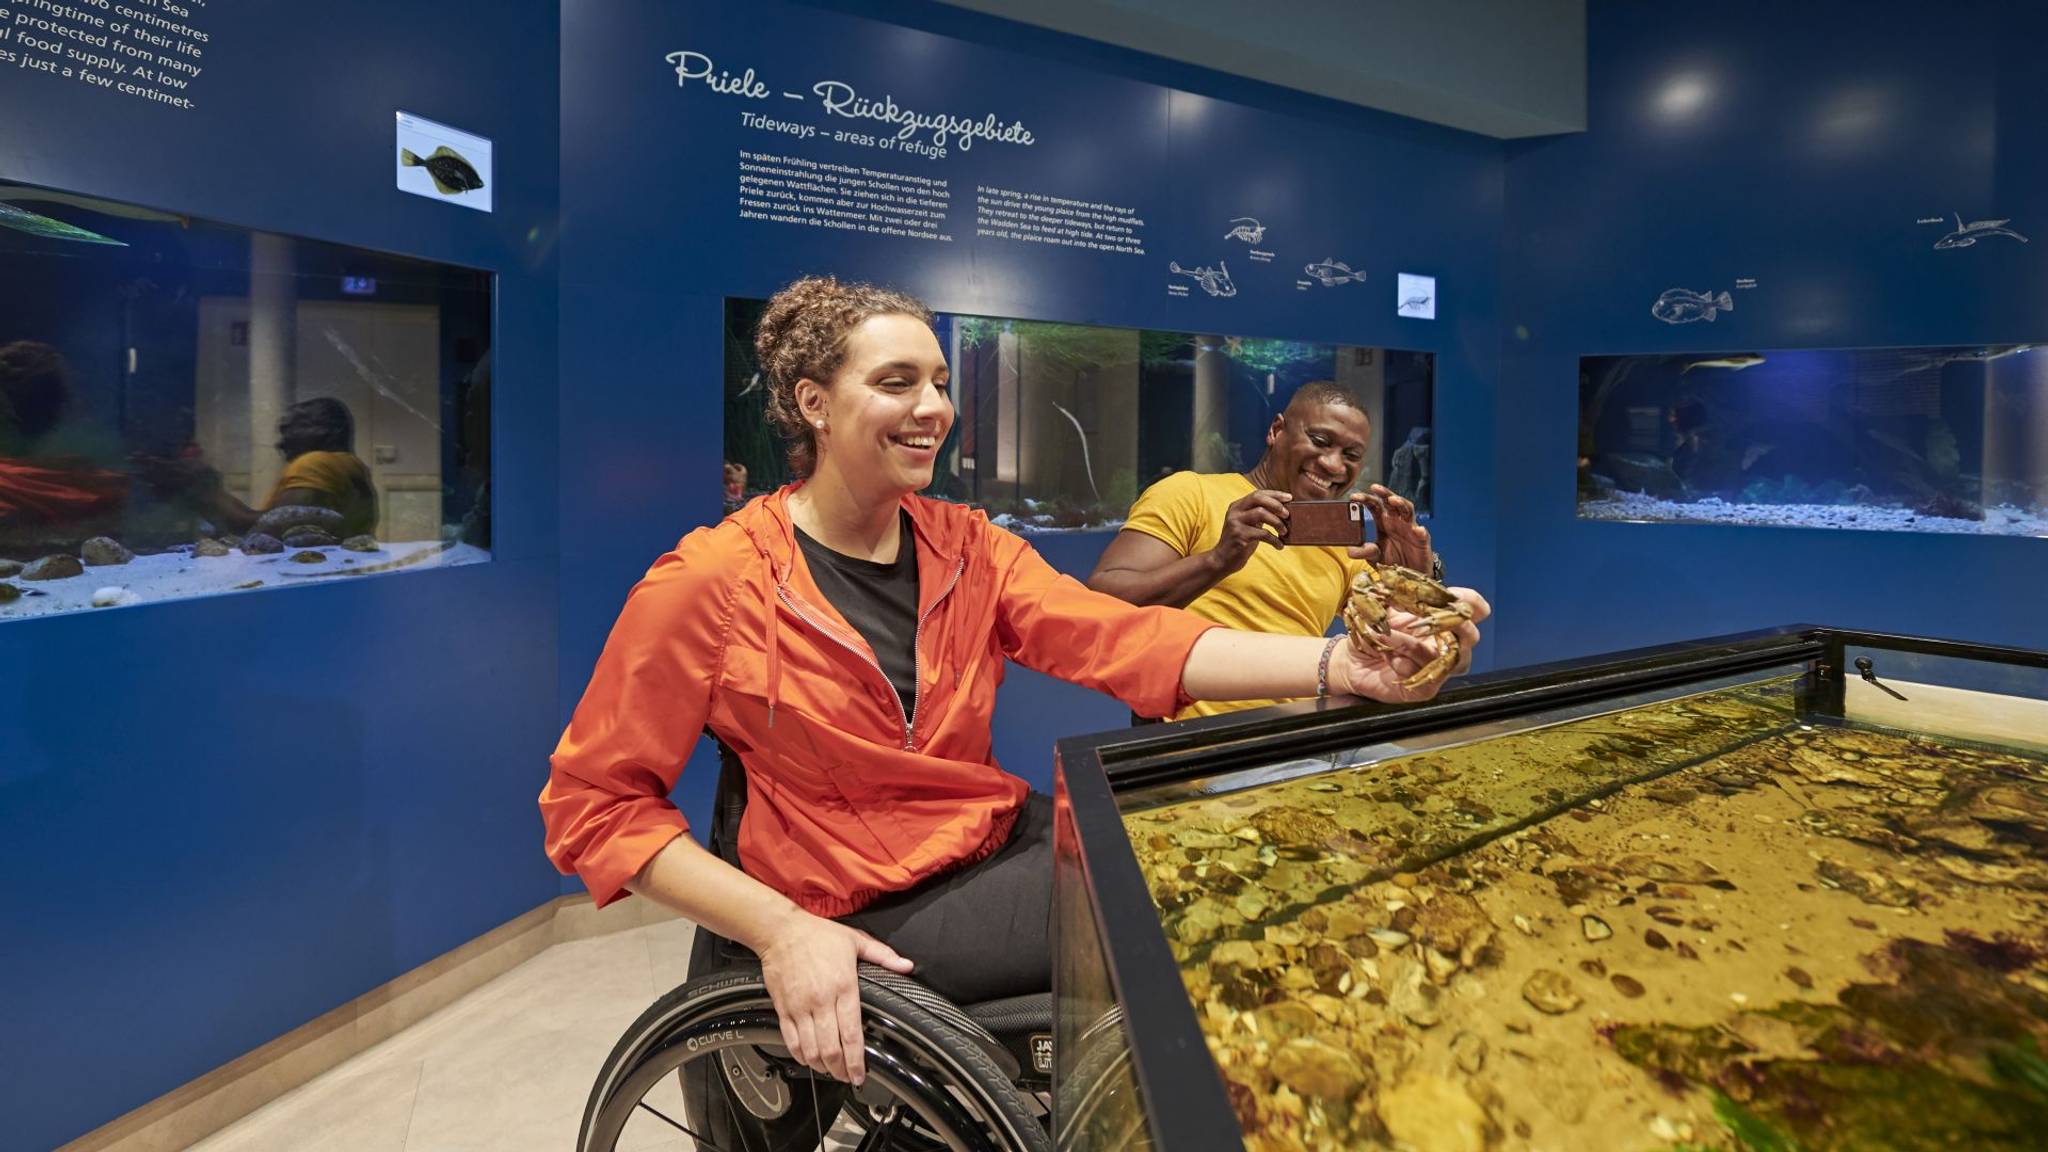 How can travel brands open up to people with disabilities?